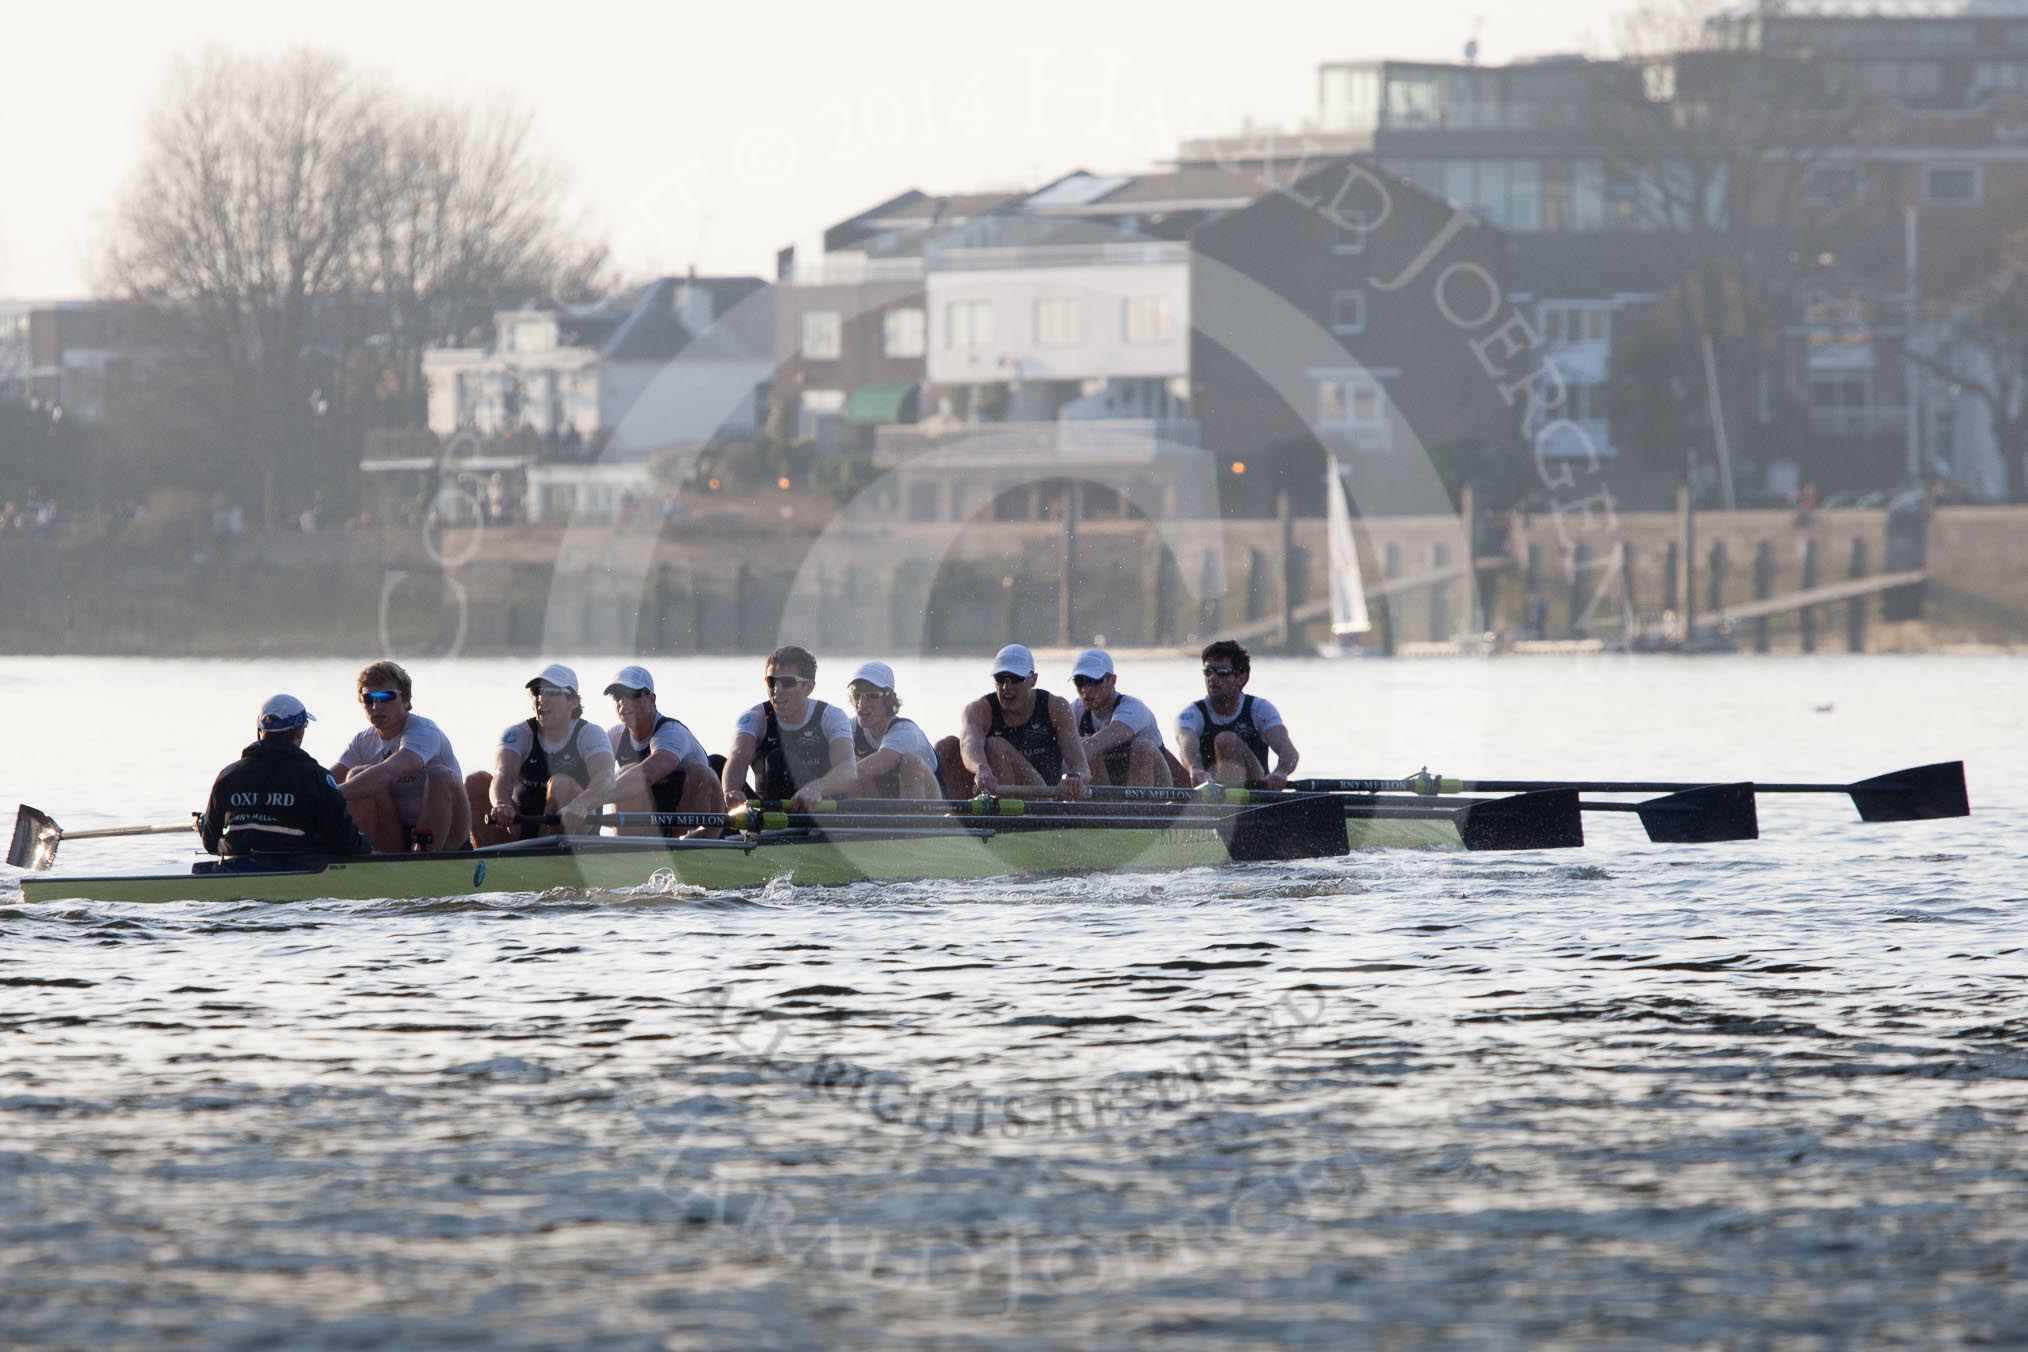 The Boat Race season 2014 - fixture OUBC vs German U23: The OUBC boat in the shadow of Hammersmith Bridge..
River Thames between Putney Bridge and Chiswick Bridge,



on 08 March 2014 at 16:53, image #118